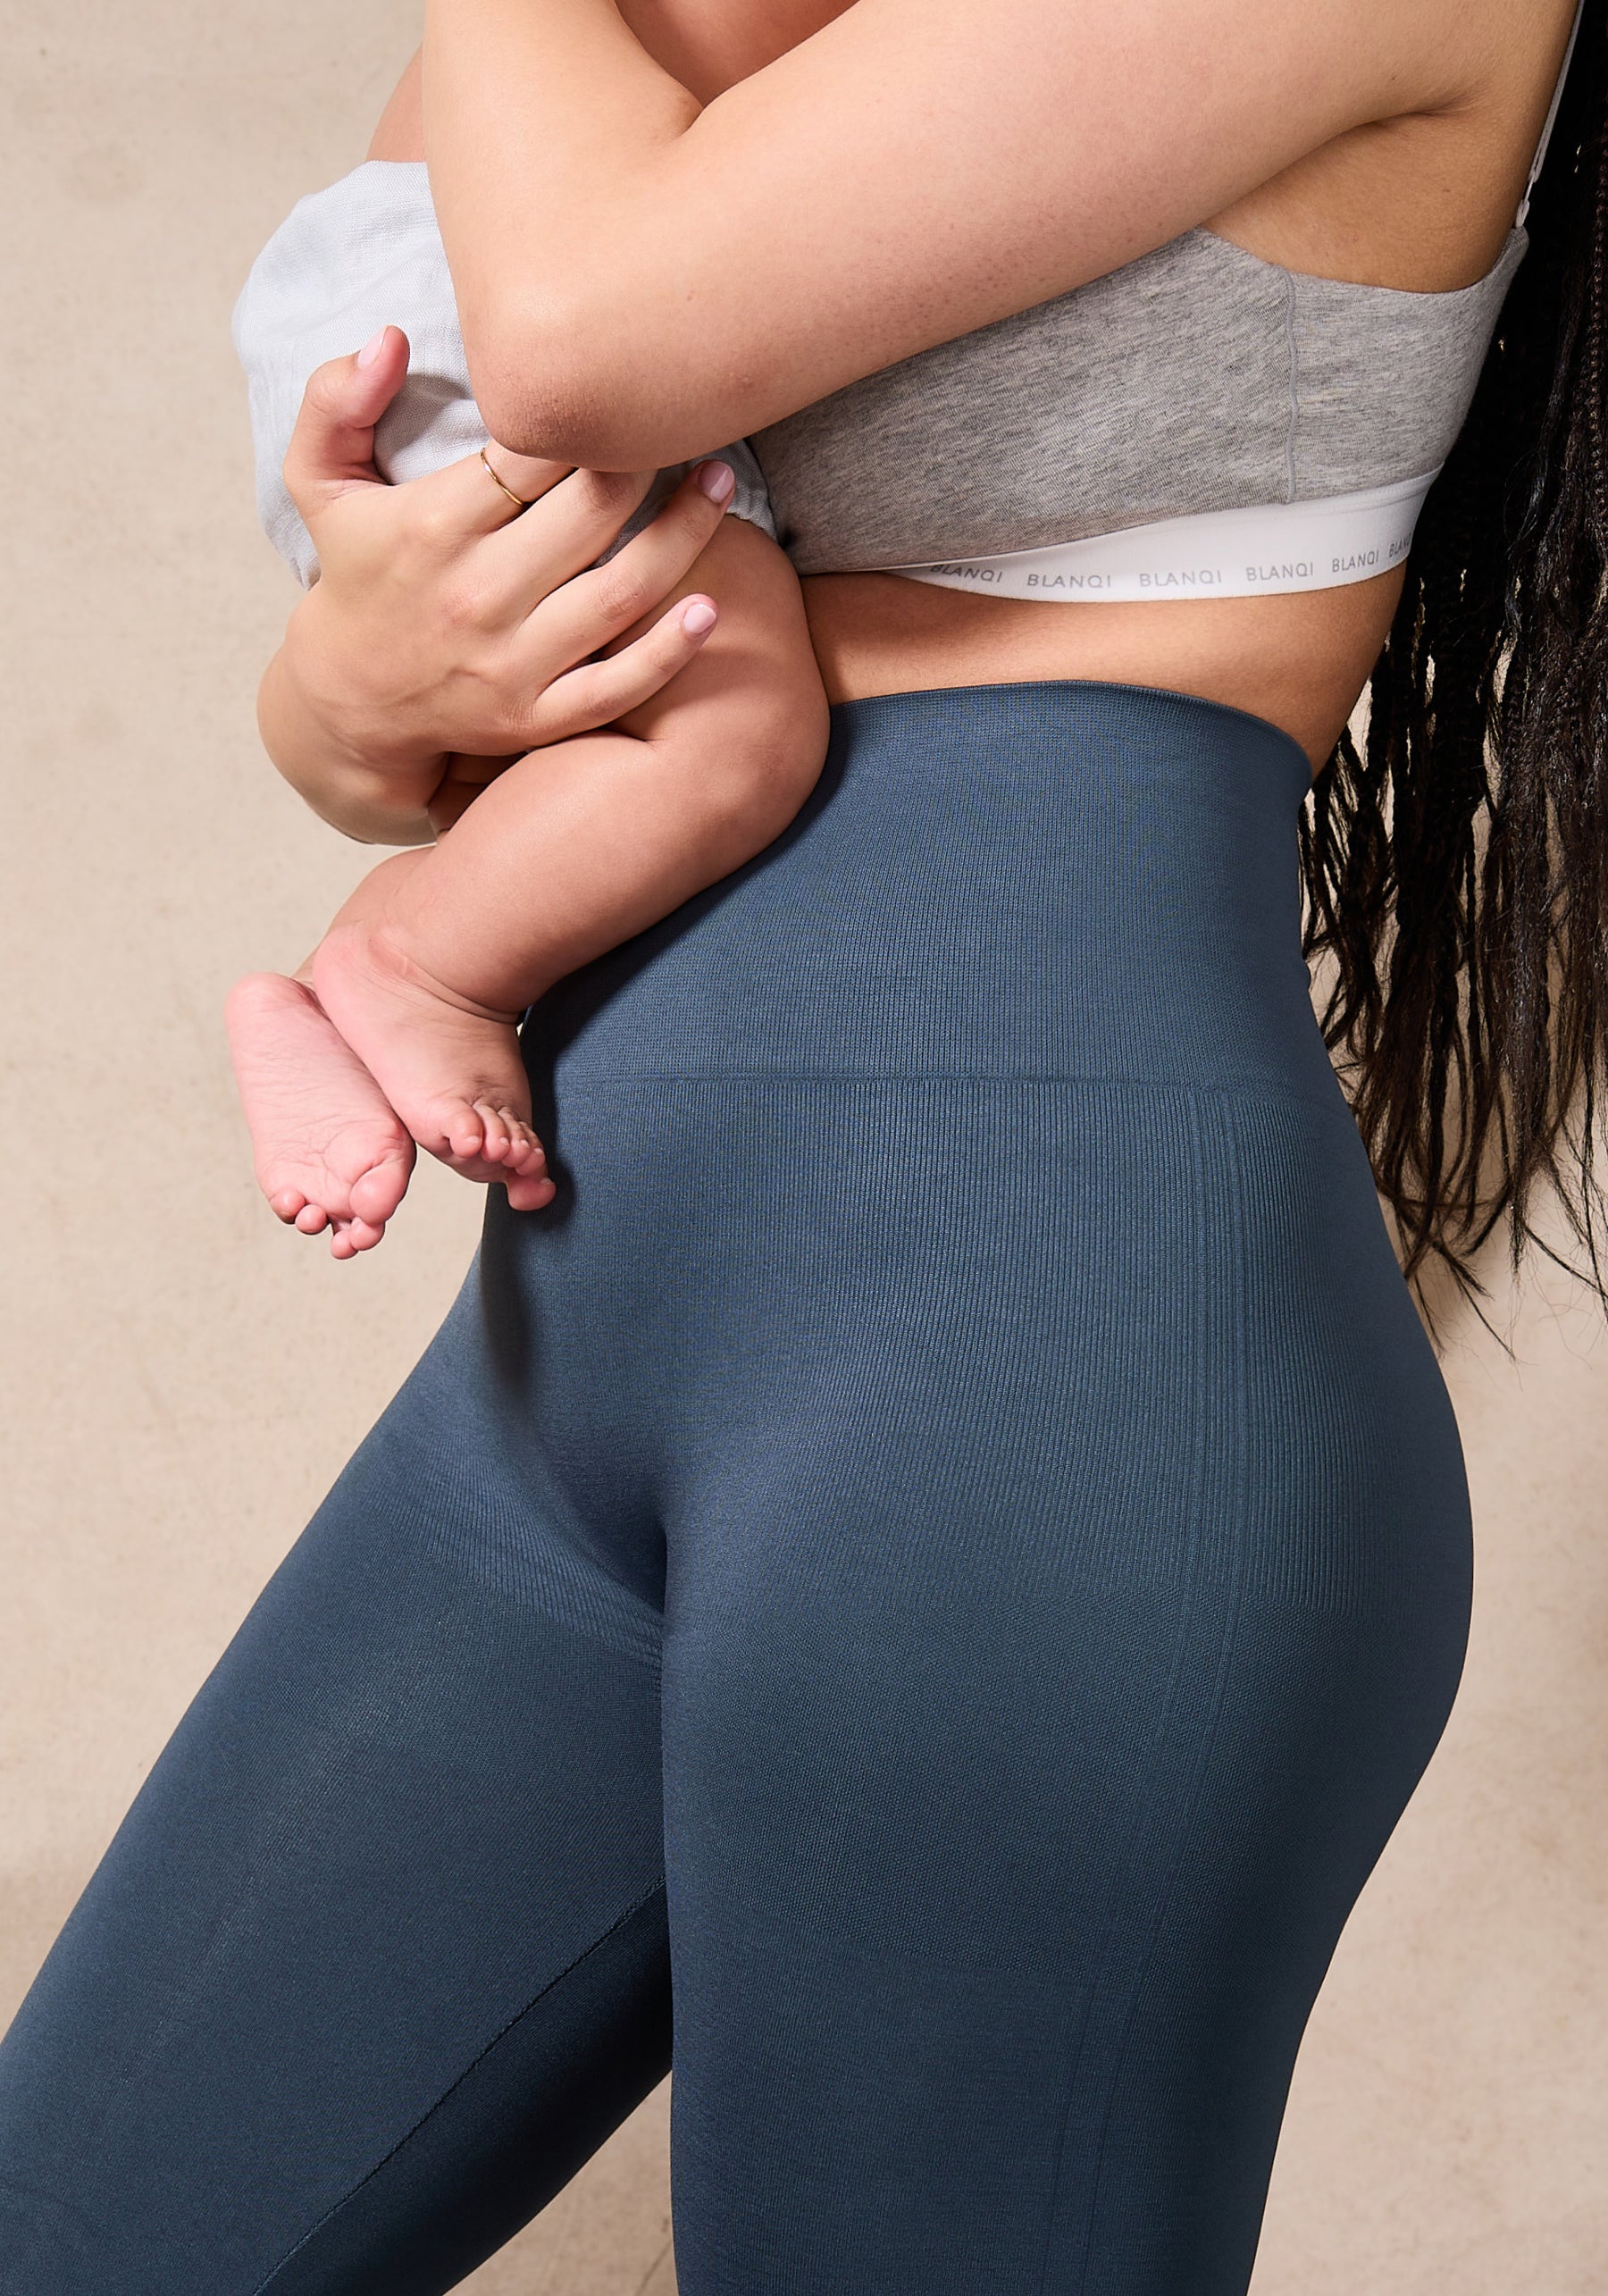 Blanqi Everyday Maternity Belly Support Leggings Black Size undefined - $48  - From Hannah